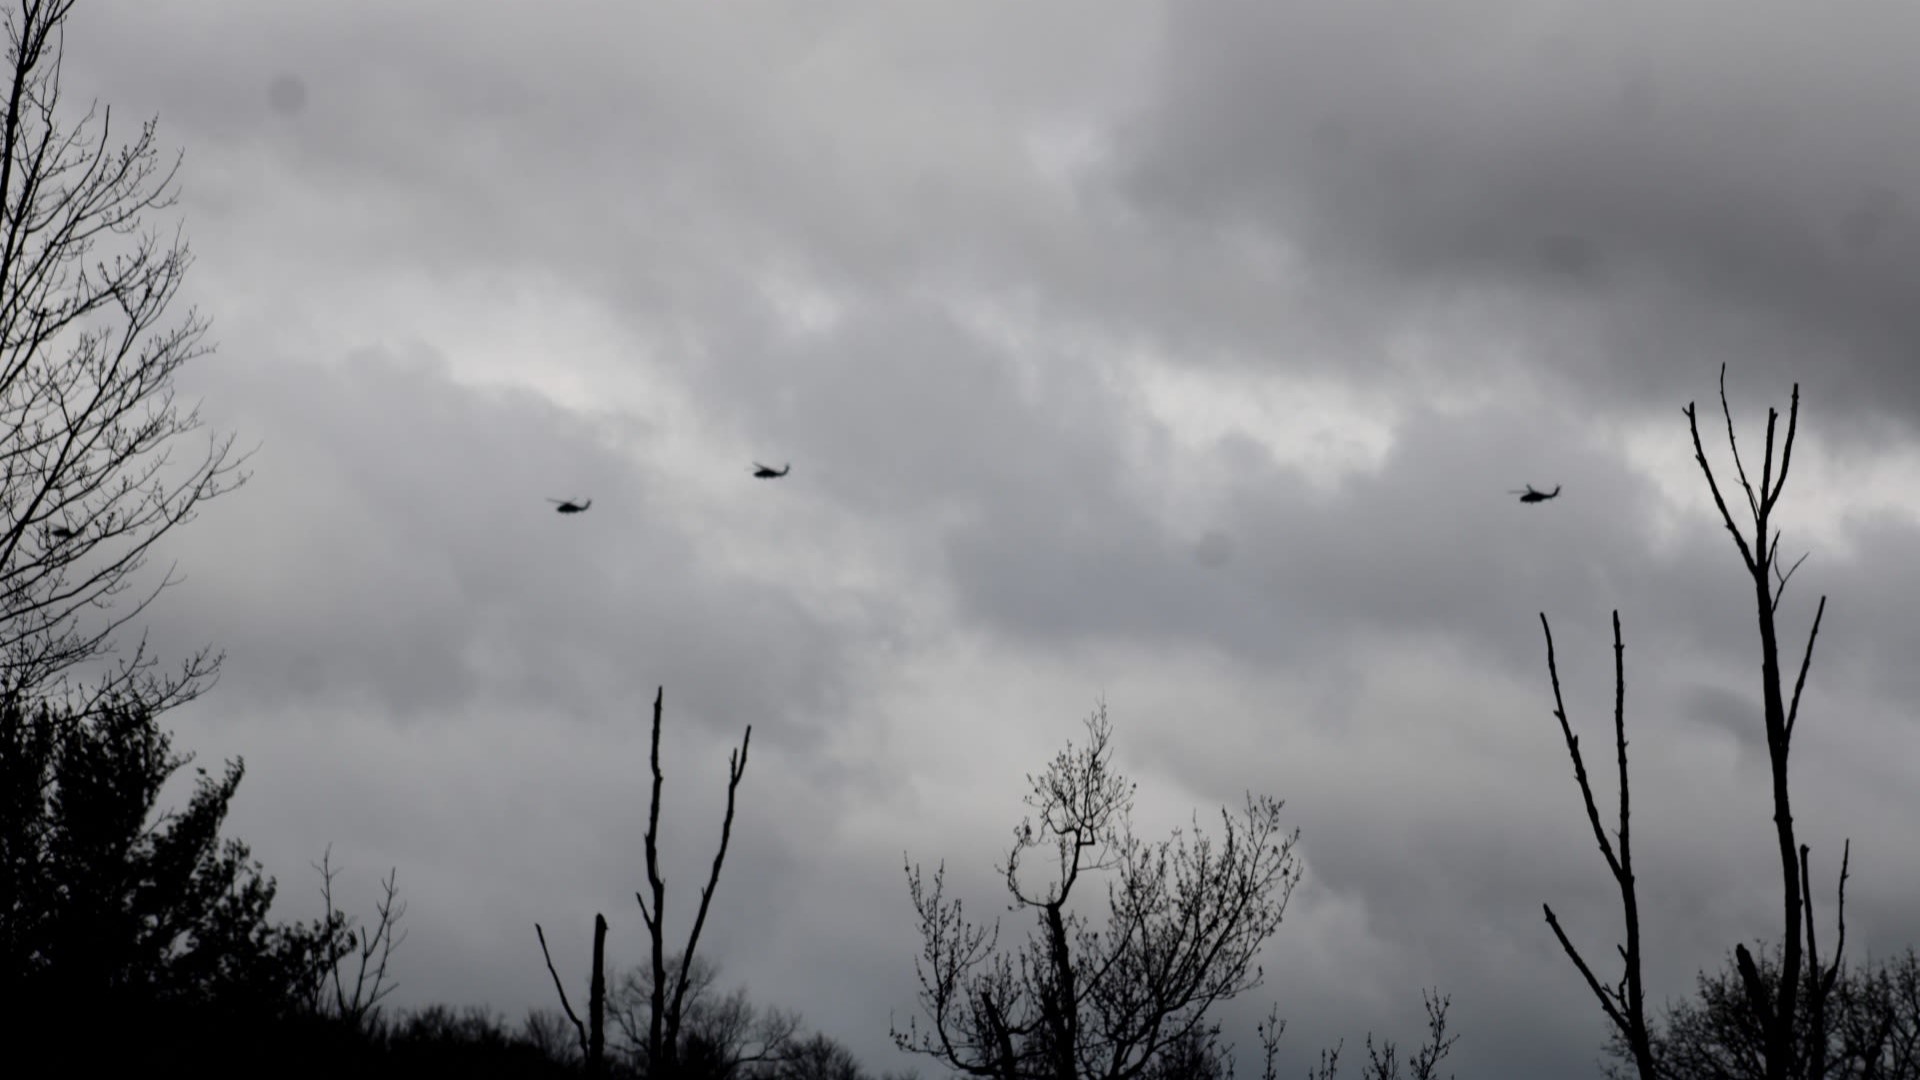 The helicopters, departing from Rome, New York, were seen flying over Springville Saturday morning.